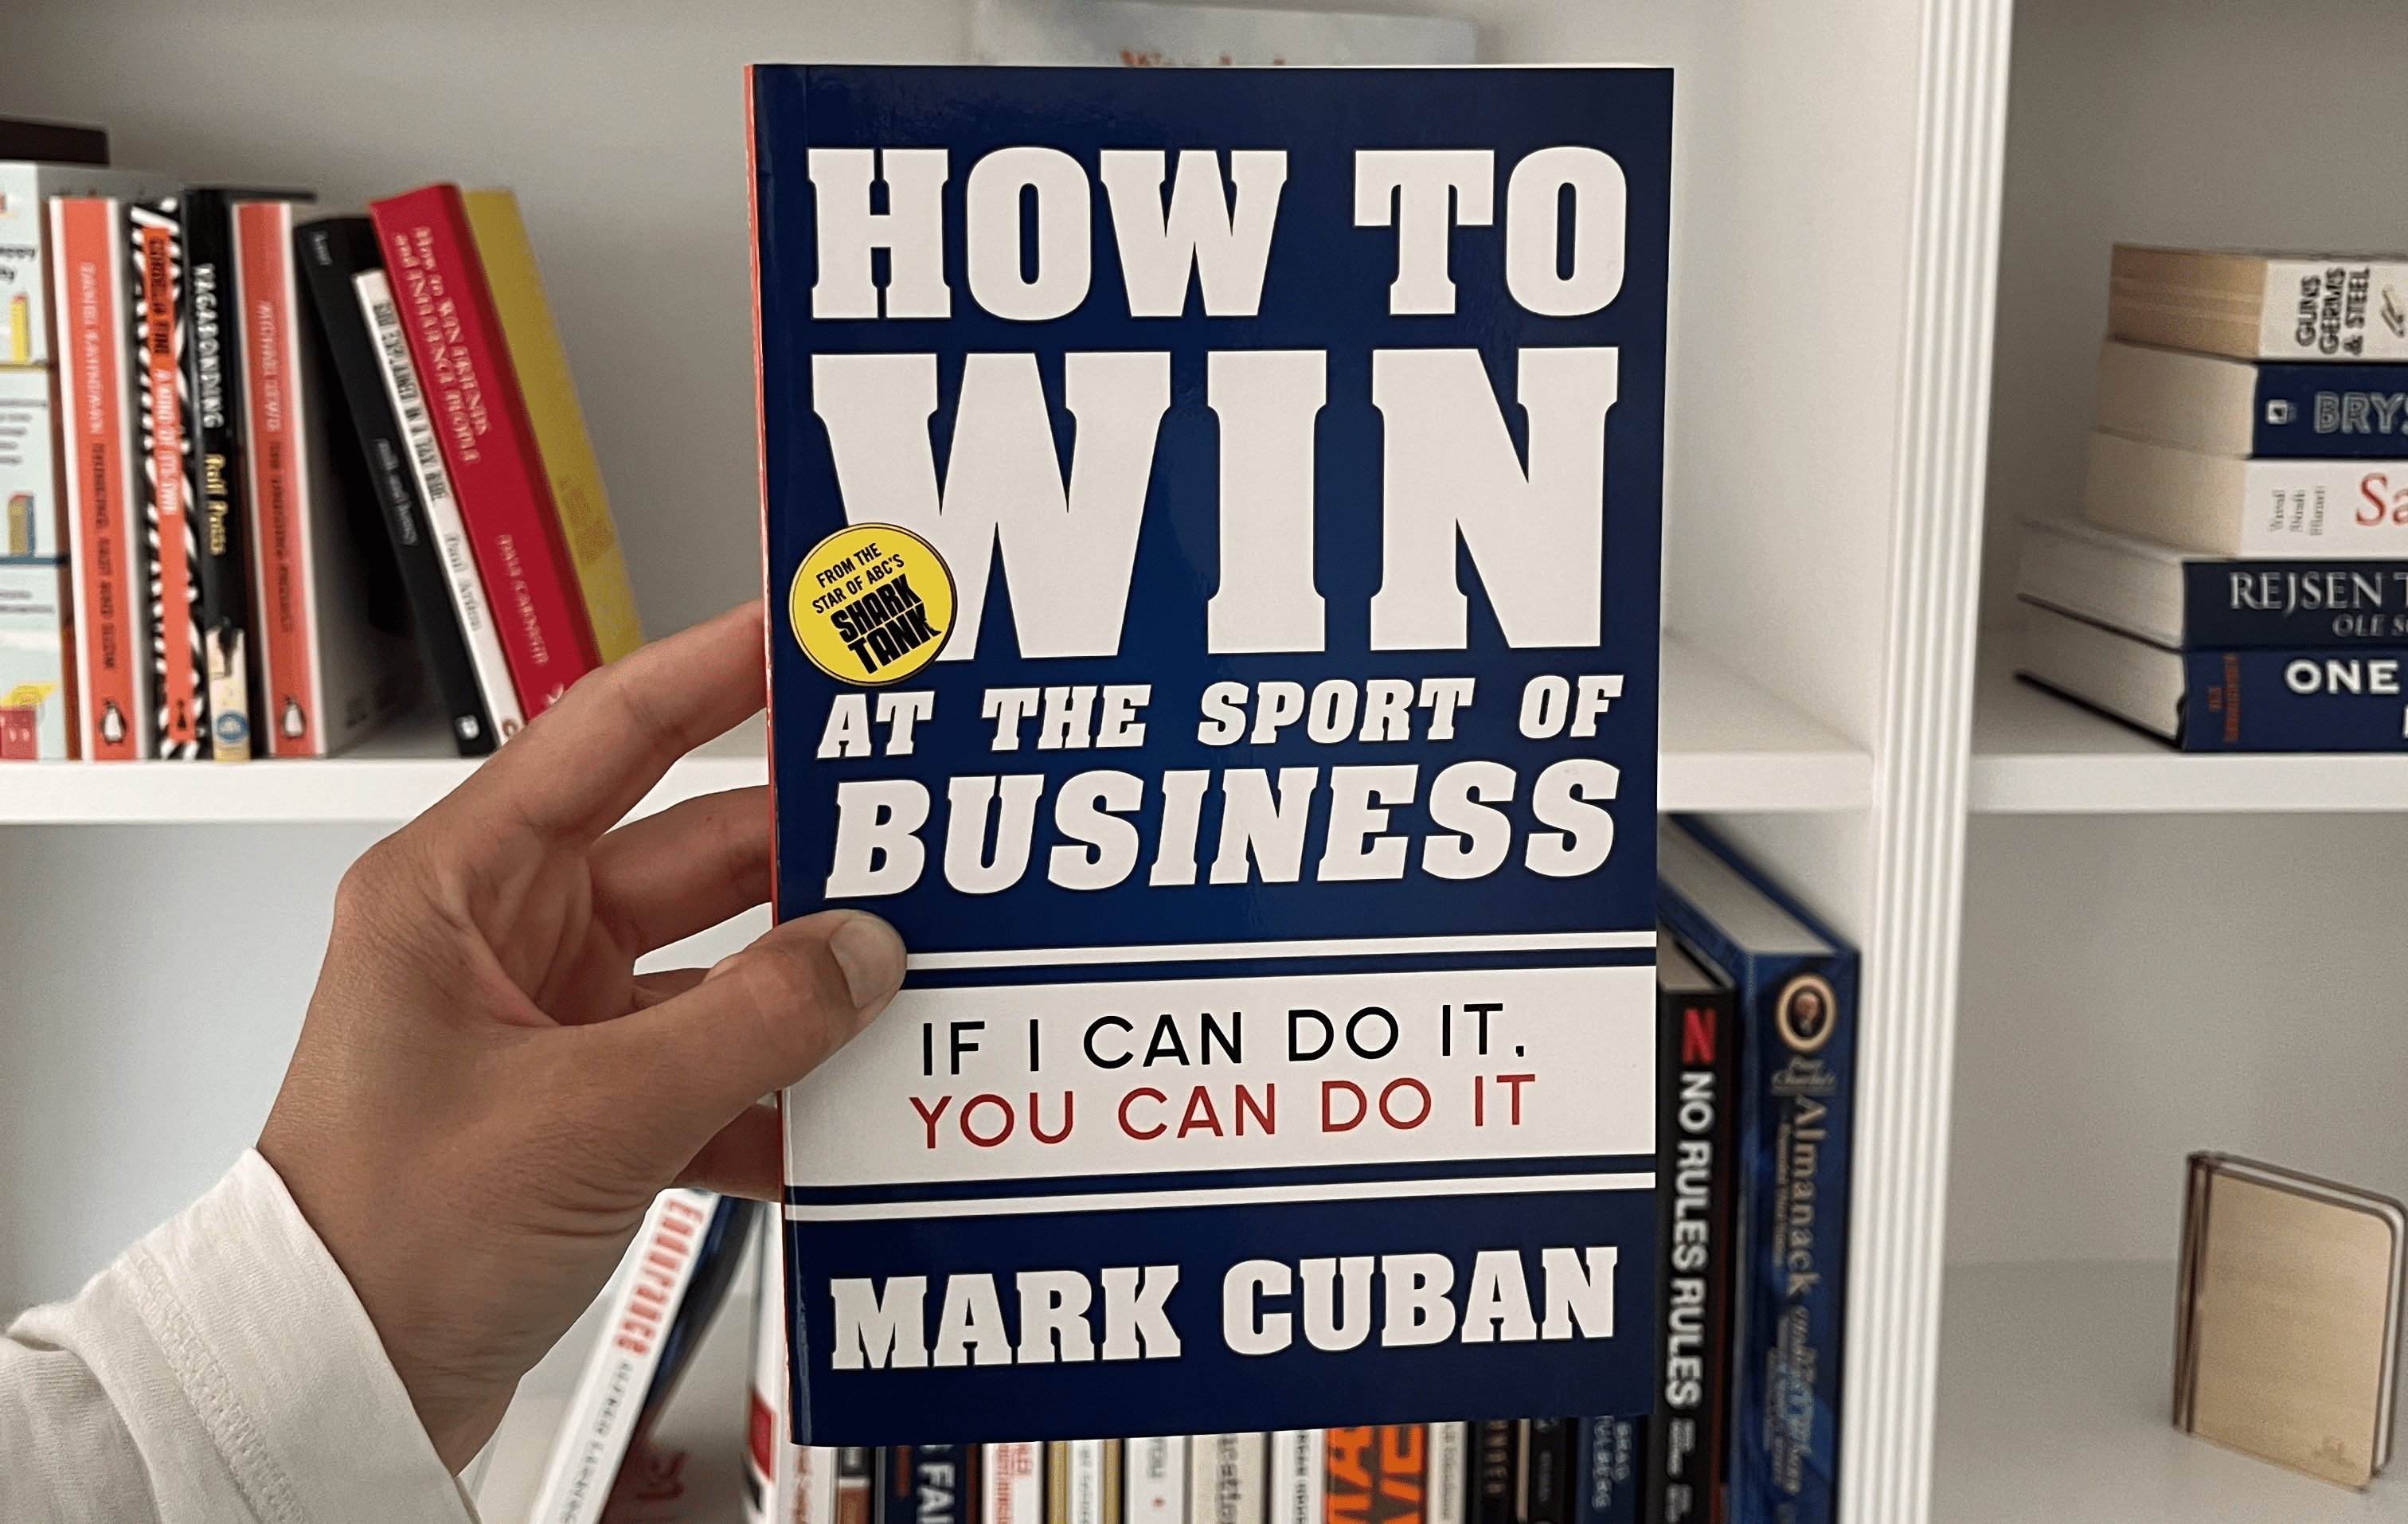 Summary: How to Win at the Sport of Business: If I Can Do It, You Can Do It by Mark Cuban